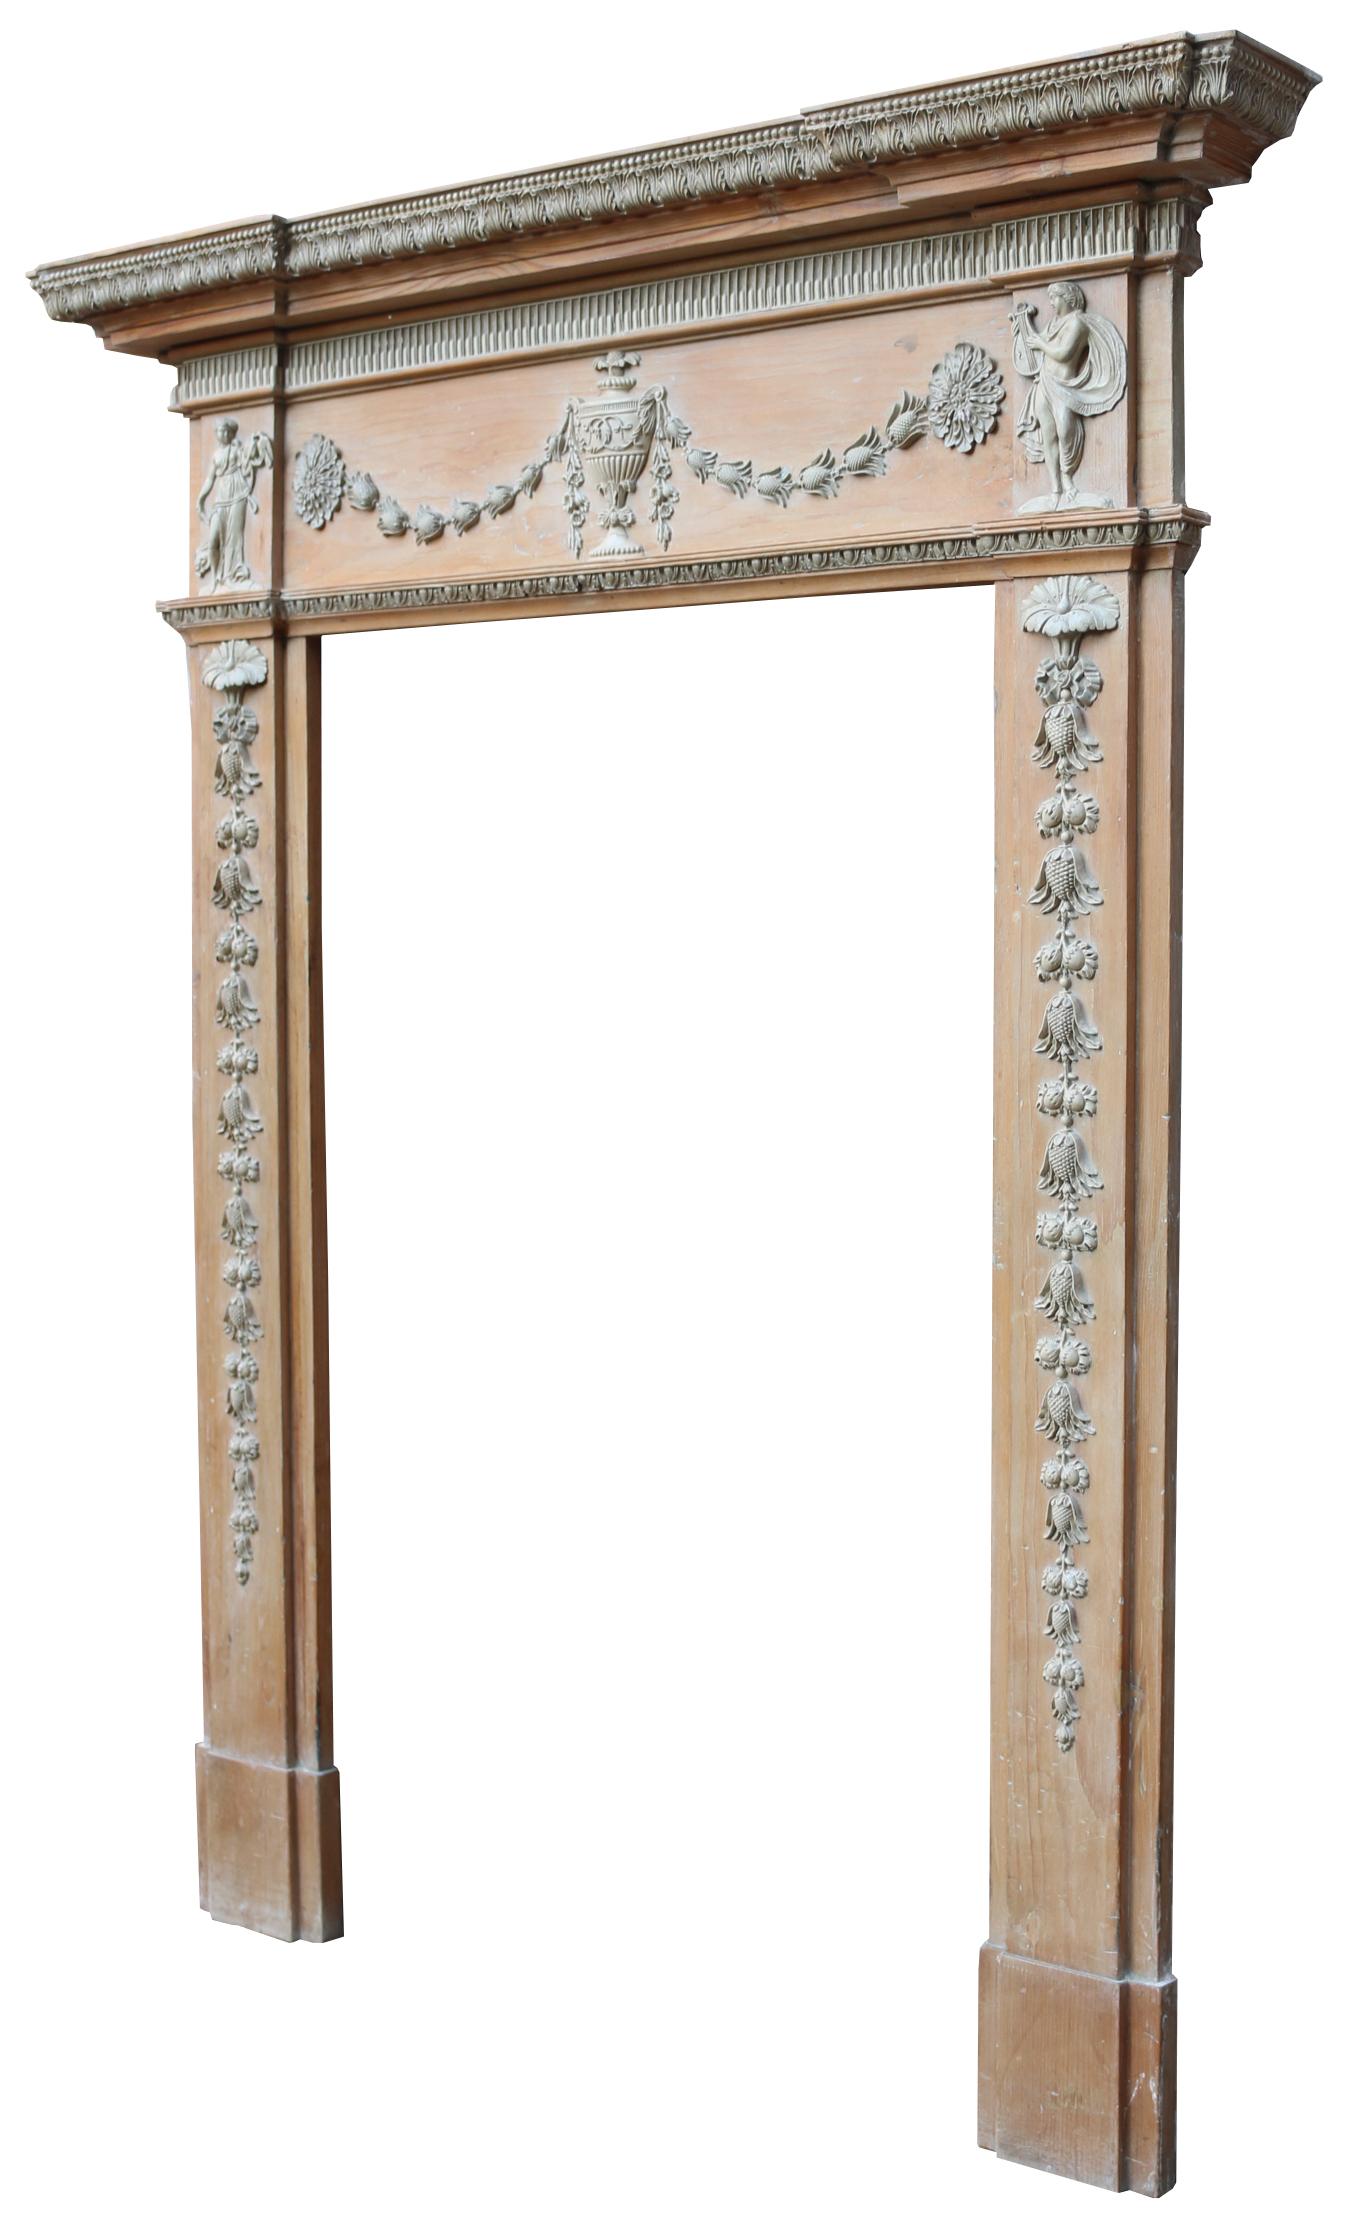 About

This beautiful fire surround originally came from a private residence in Harrogate, England. The fire surround is an unusually small size for this style. 

Available individually, or paired with its original grate (pictured)

The fire